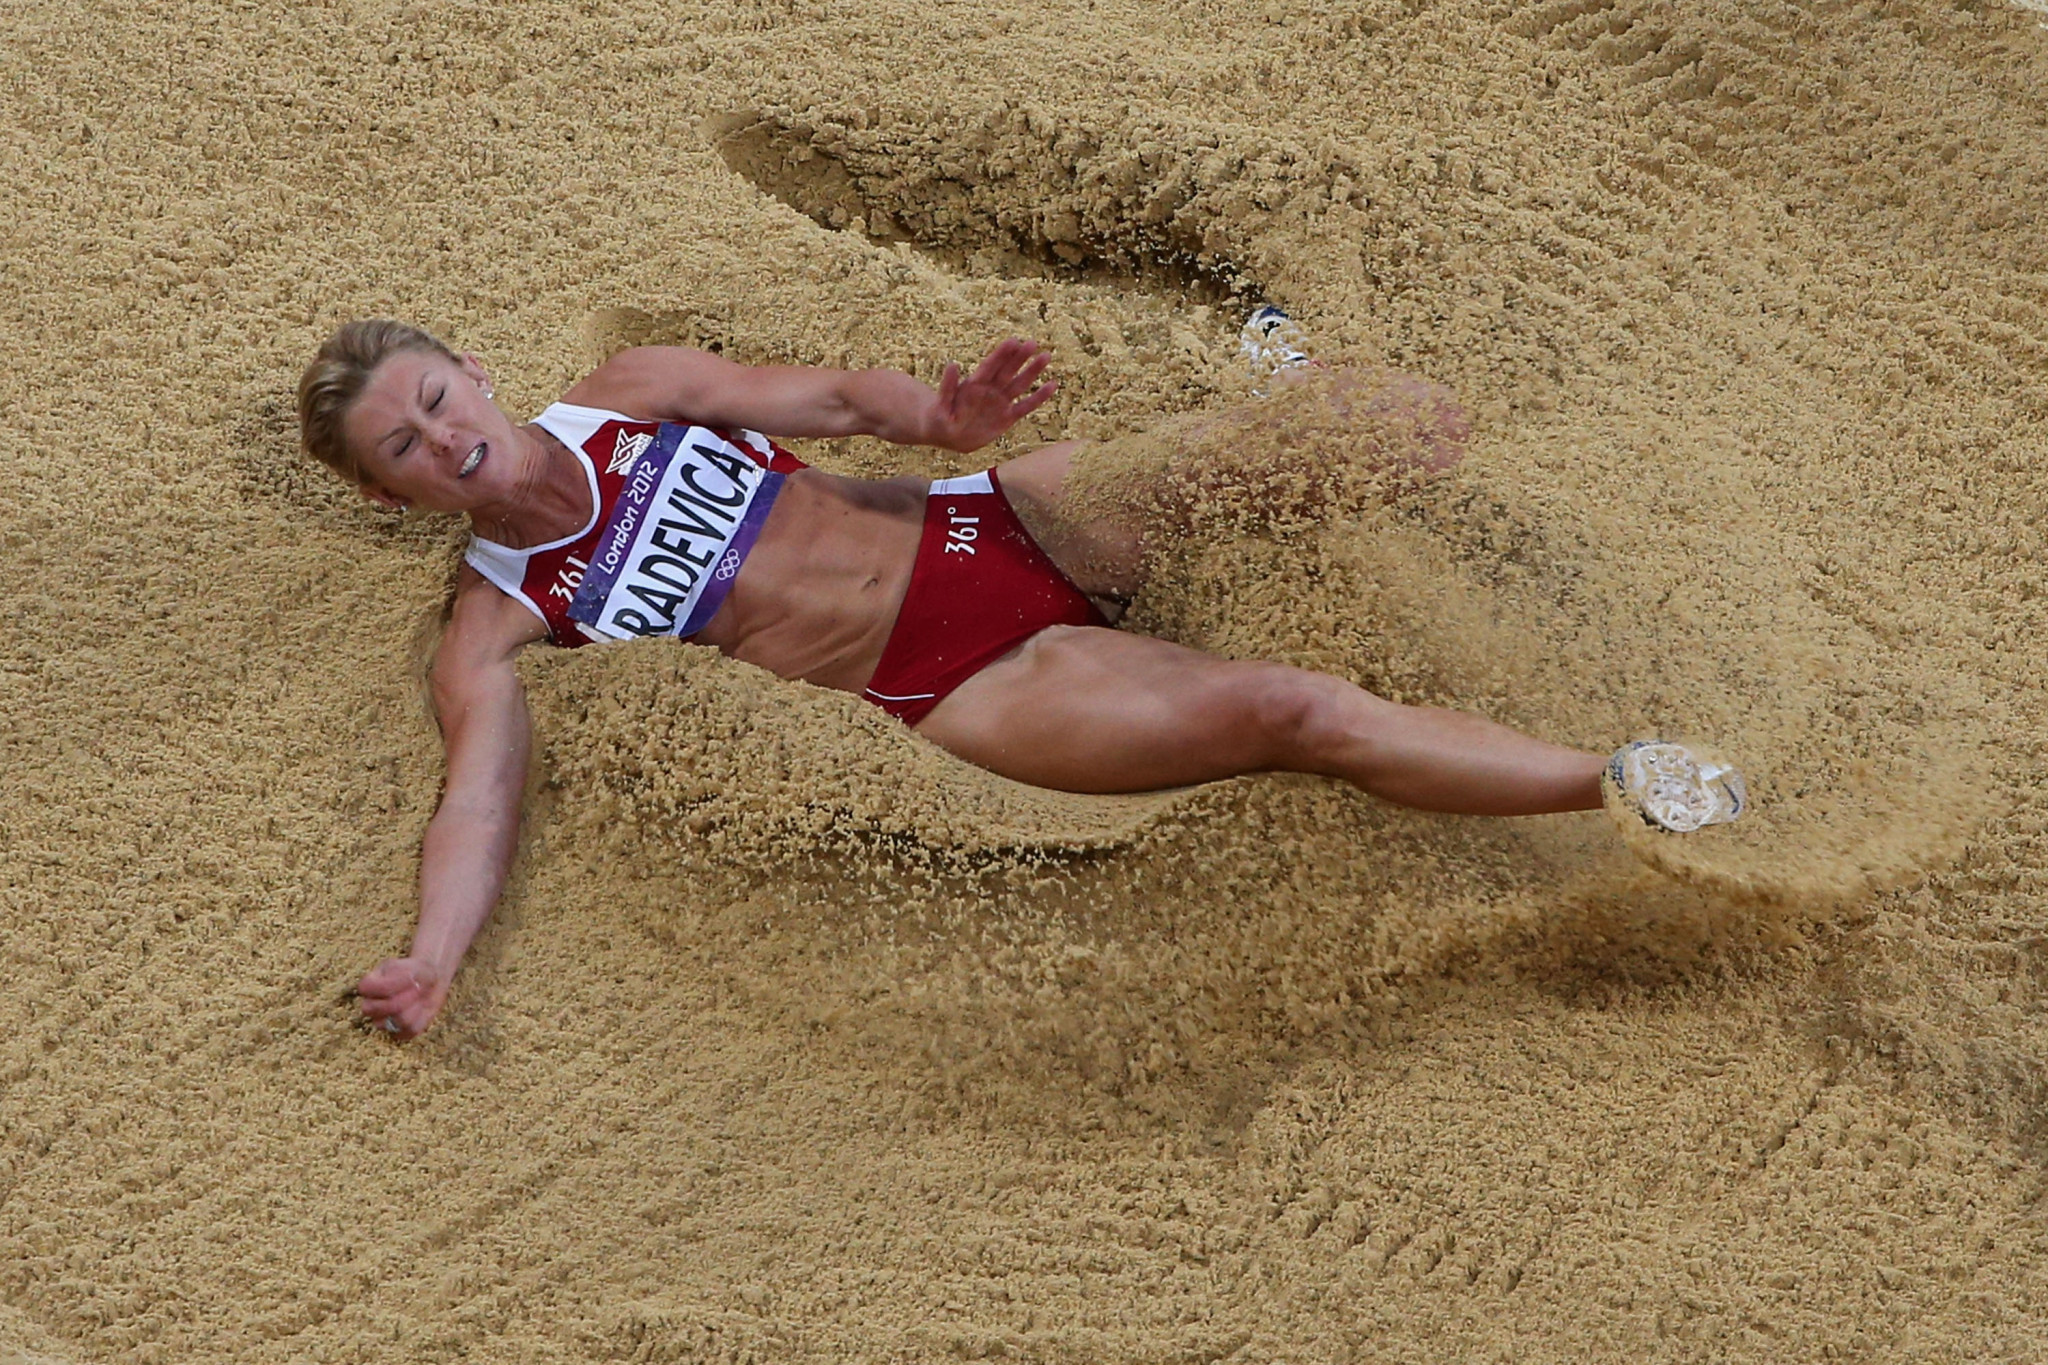 Ineta Radevica finished in fourth place at the London 2012 Olympics ©Getty Images